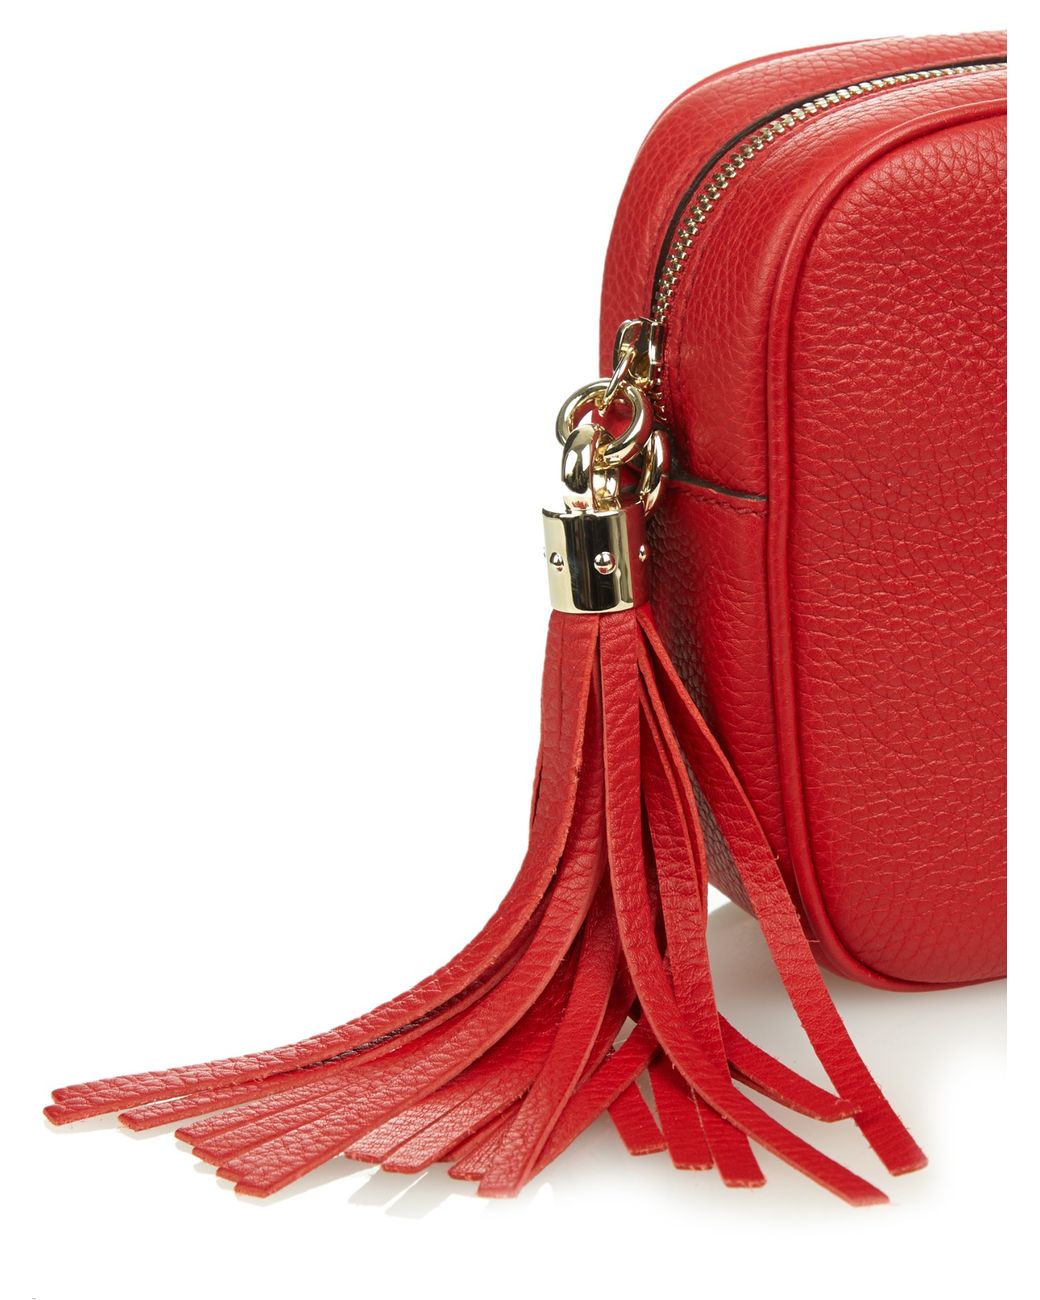 Gucci Soho Grained-Leather Cross-Body Bag in Red | Lyst